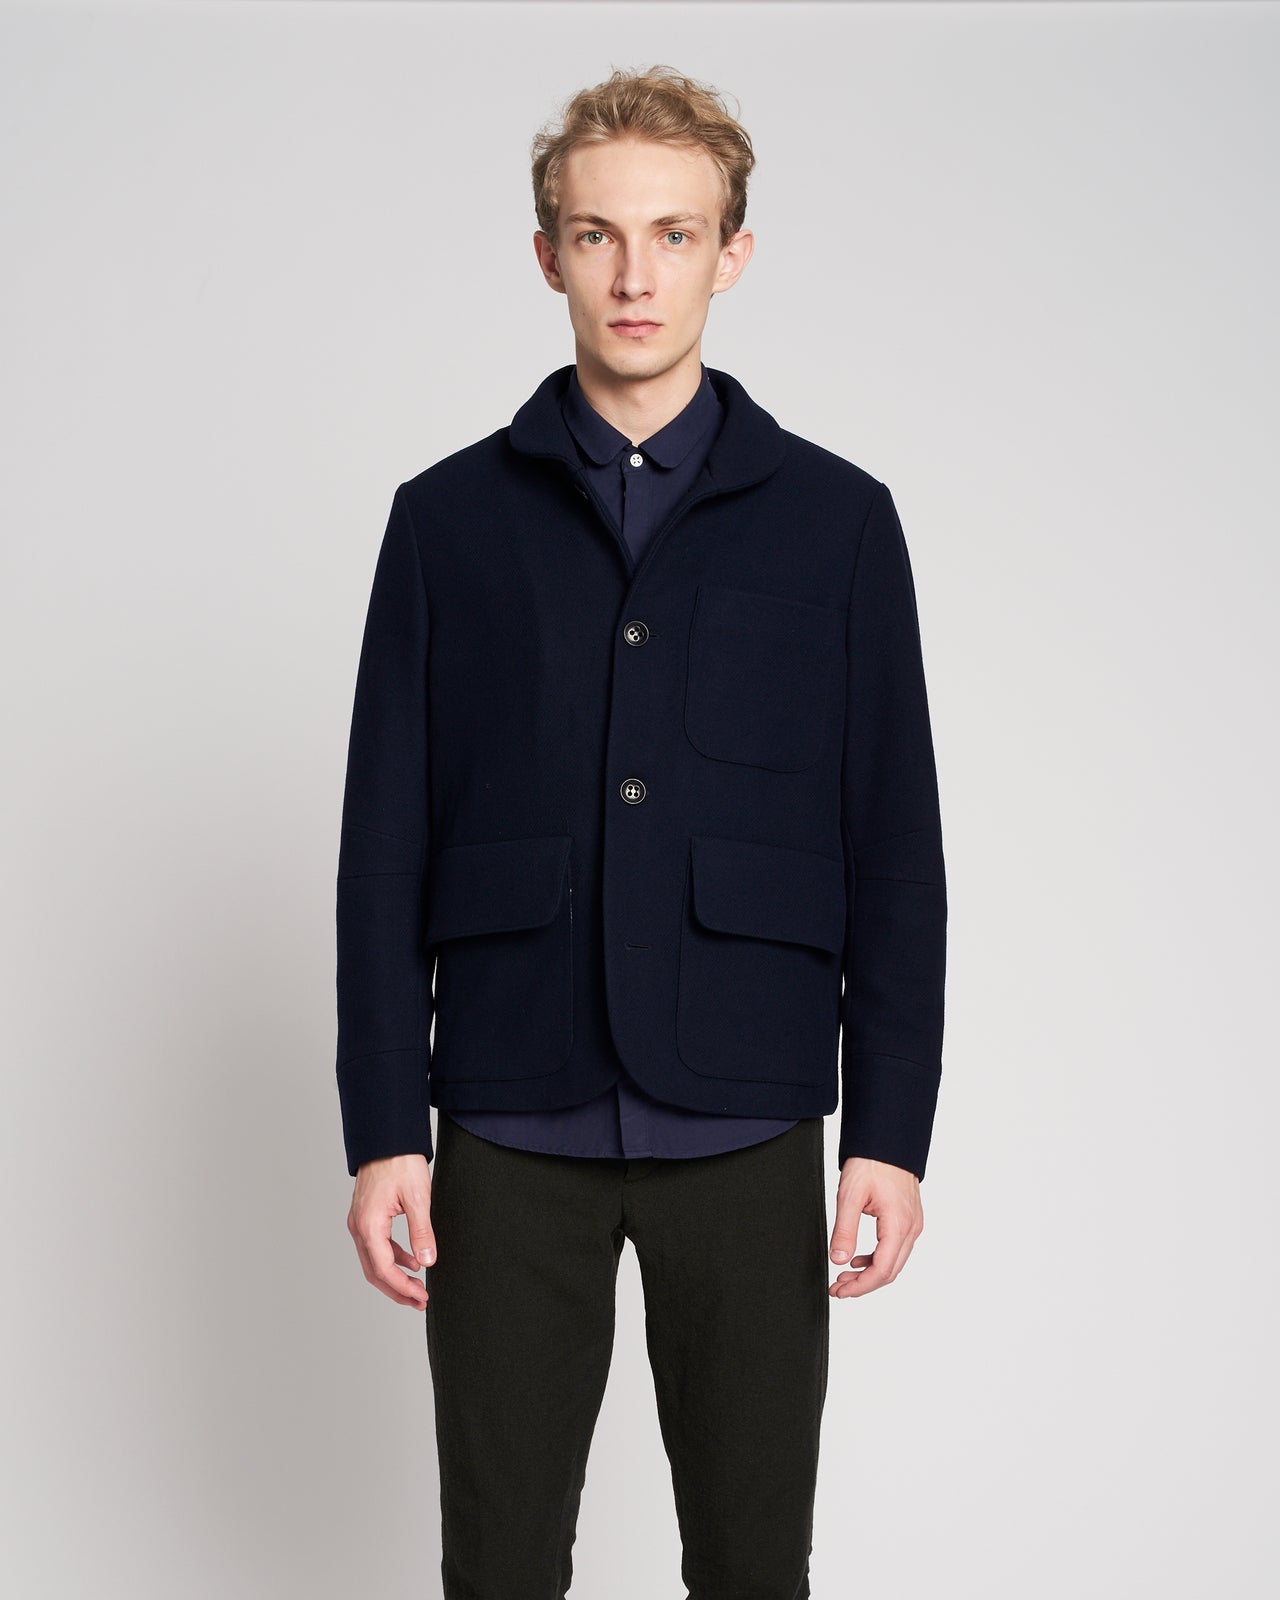 Forest Jacket in a Deep Blue Italian Wool with MEIDA Thermo Insulation